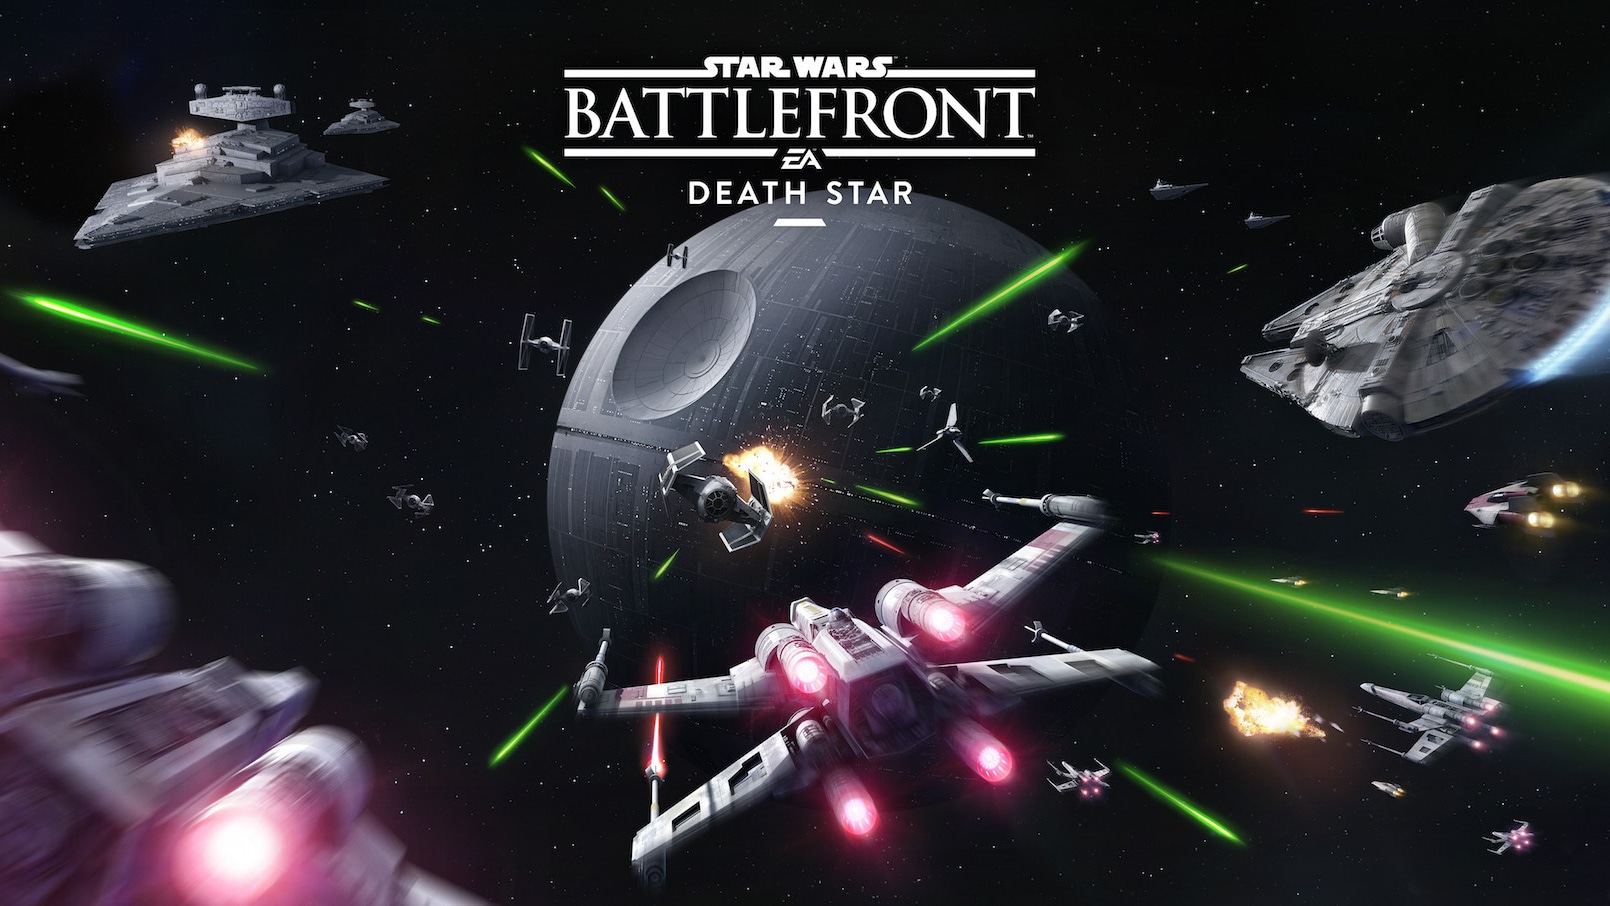 Gamescom: Rogue One Themed VR Mission And Death Star 'Battle Station' Mode Coming To Star Wars Battlefront